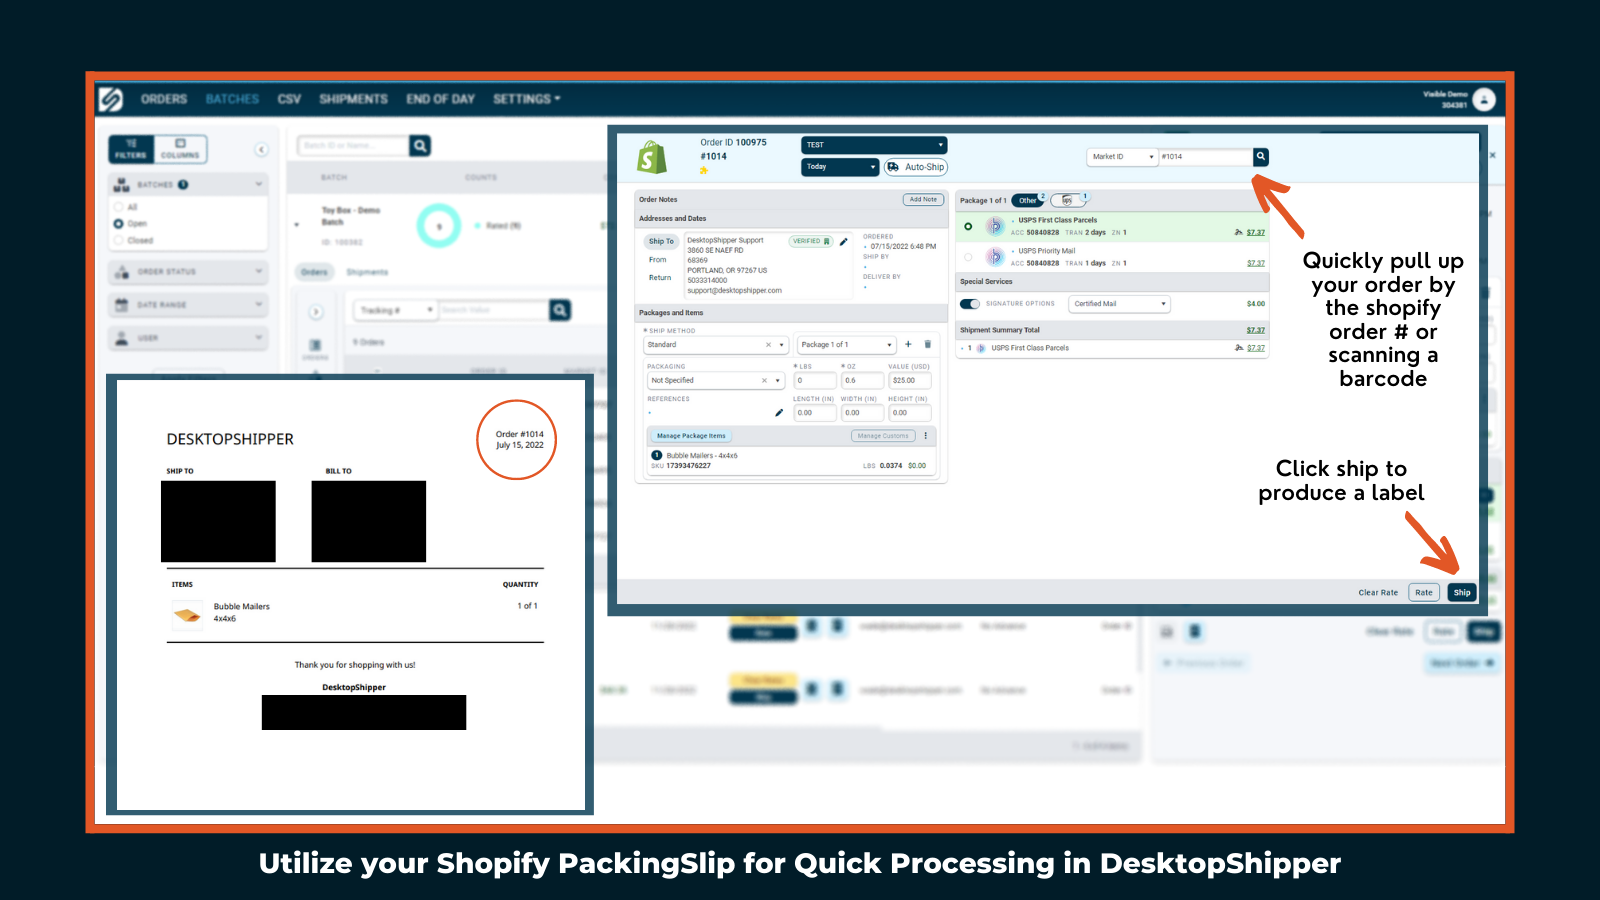 Utilize your Shopify PackingSlip for quick processing